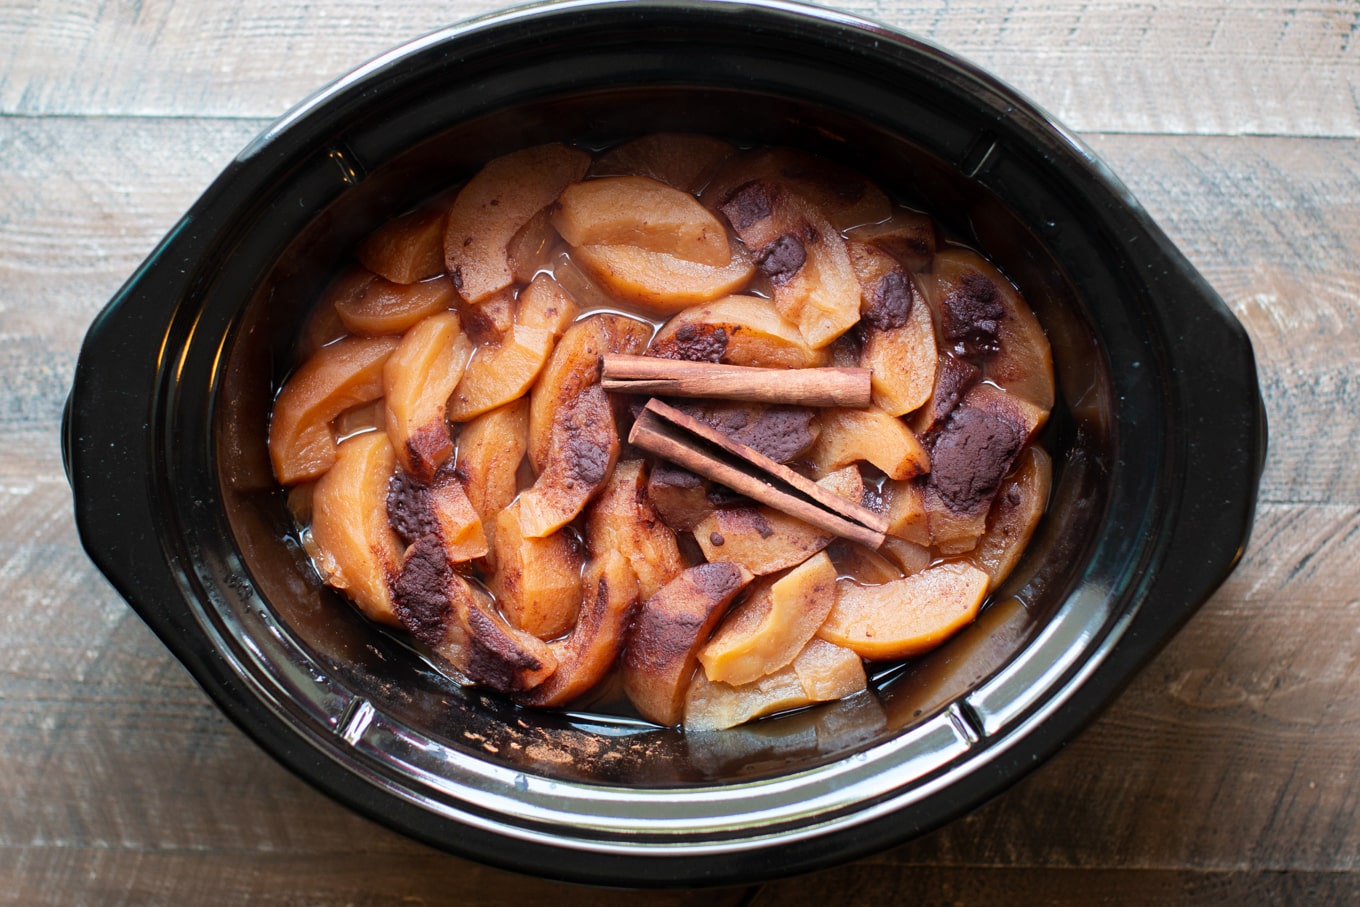 Cooked apples in a slow cooker with cinnamon on top.